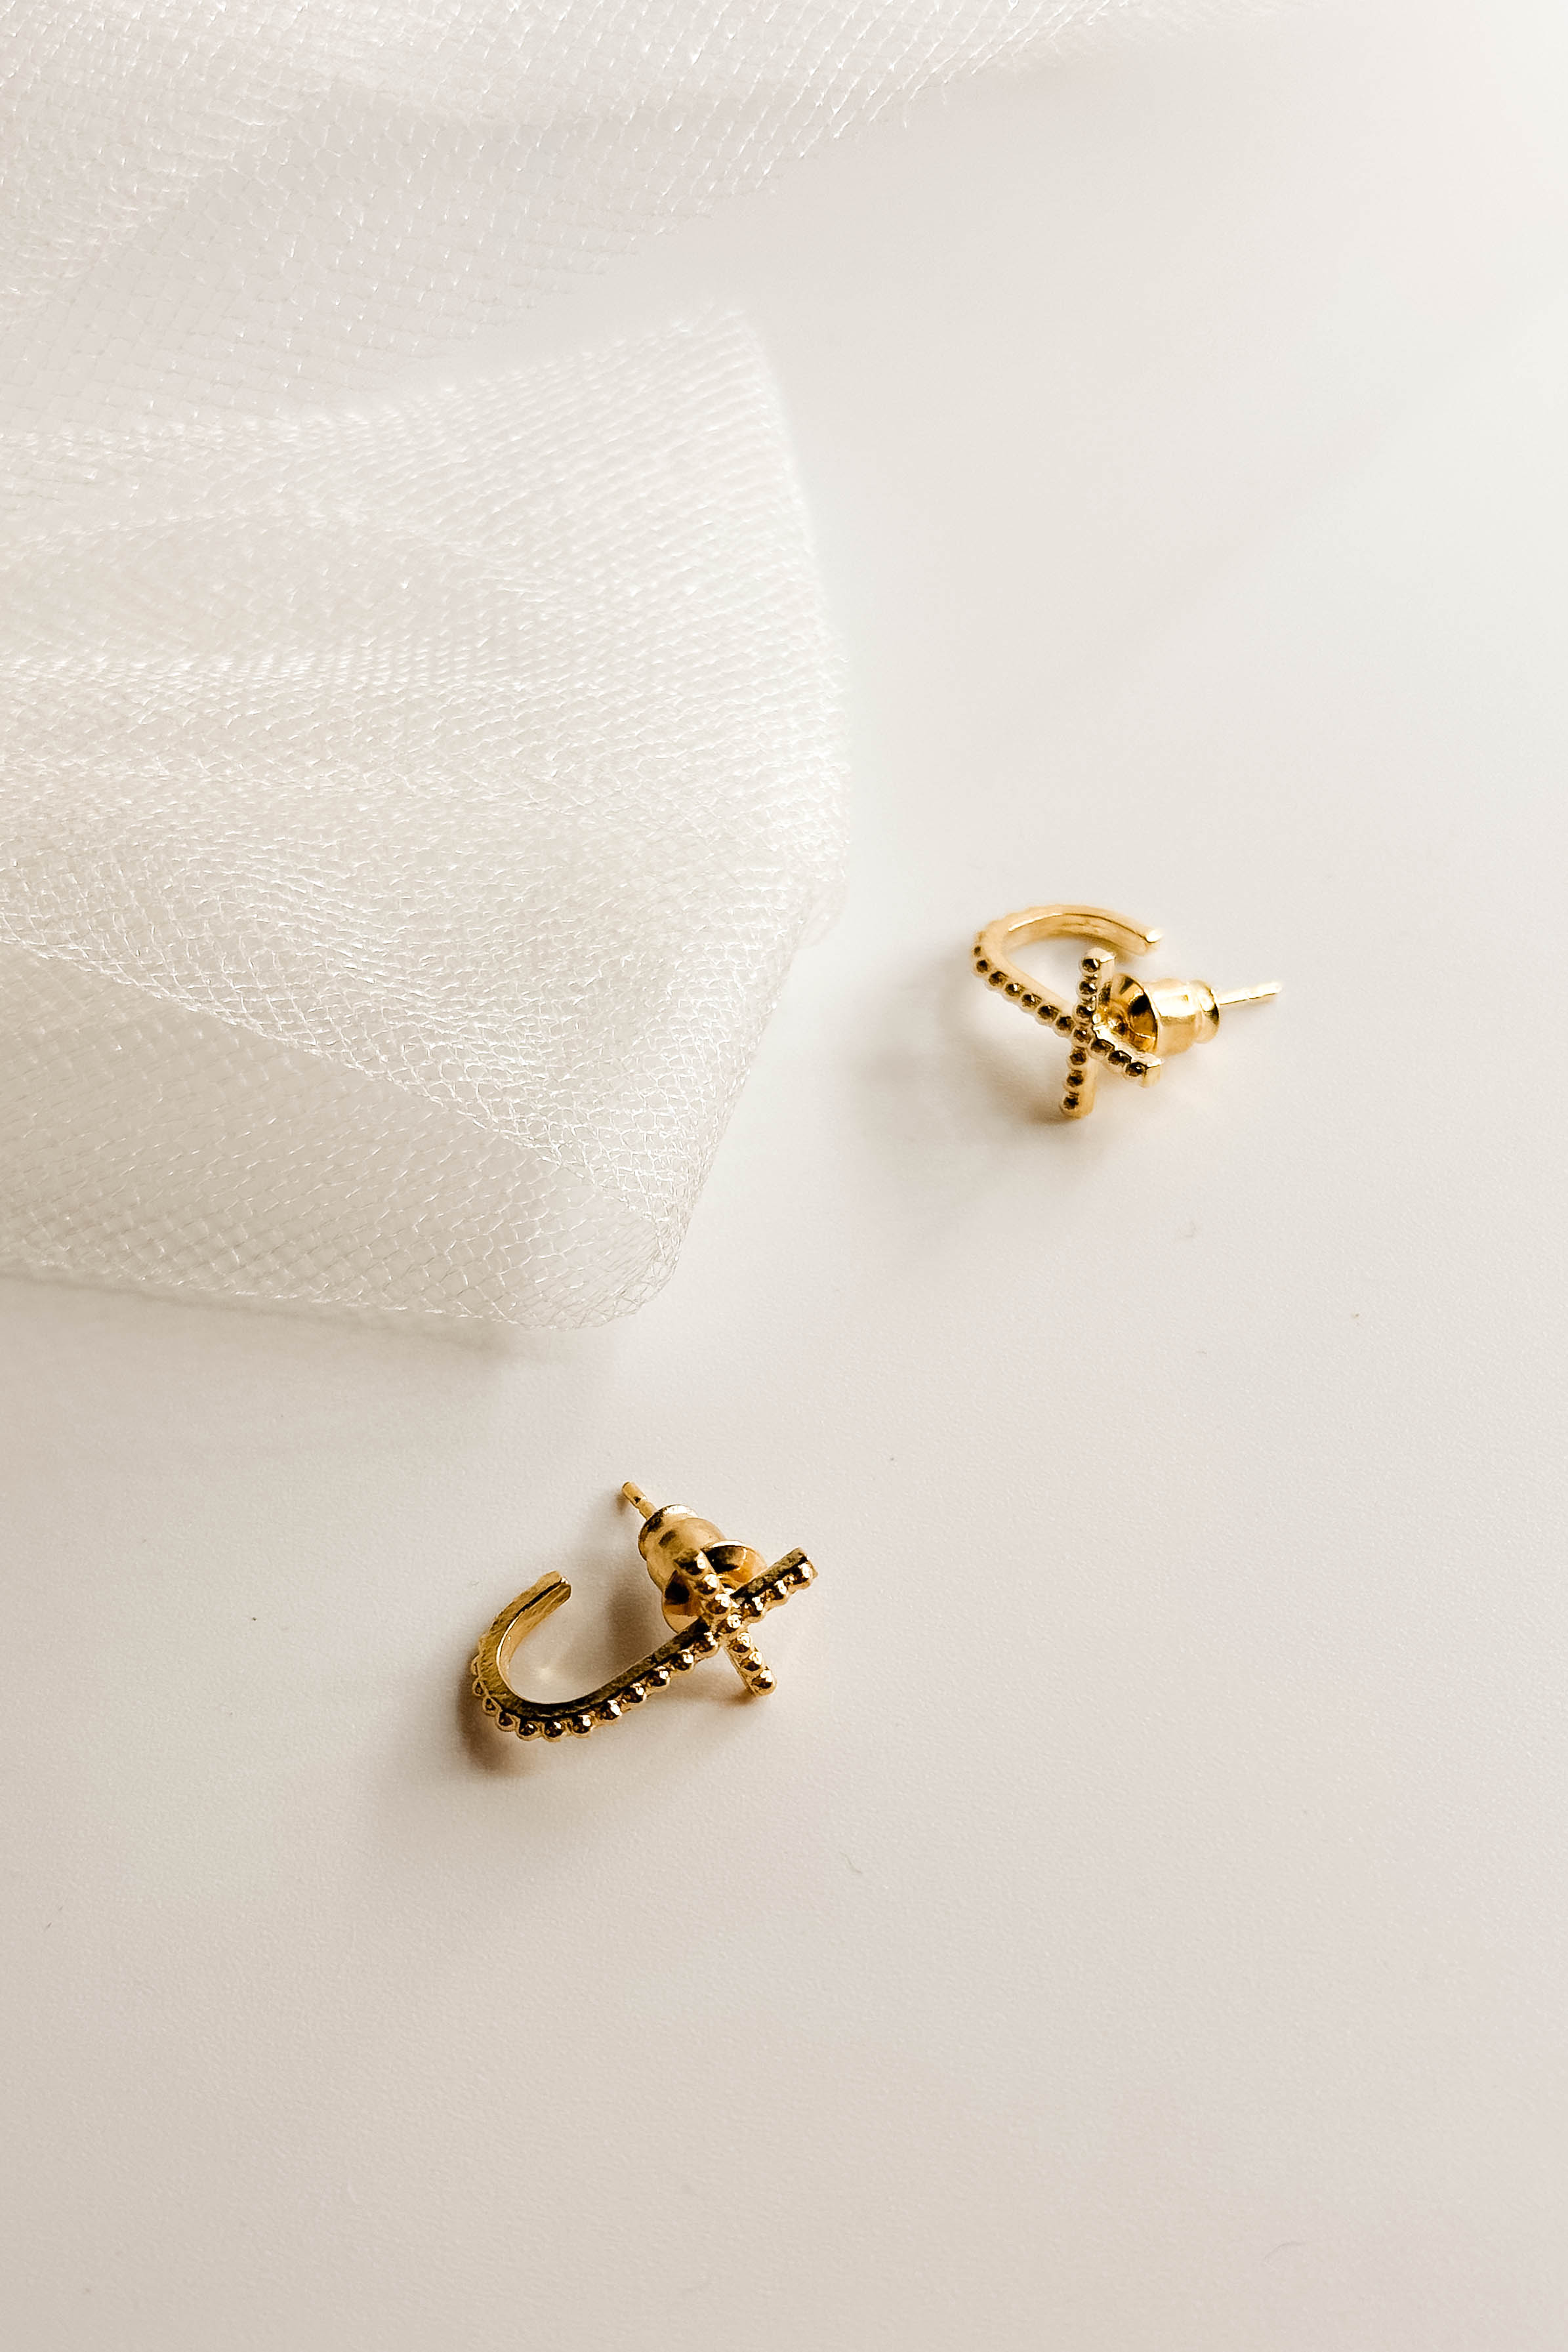 Close up detailed view of the Grace Gold Cross Stud Earring which features mini gold, open cross shaped huggies with hobnail design.